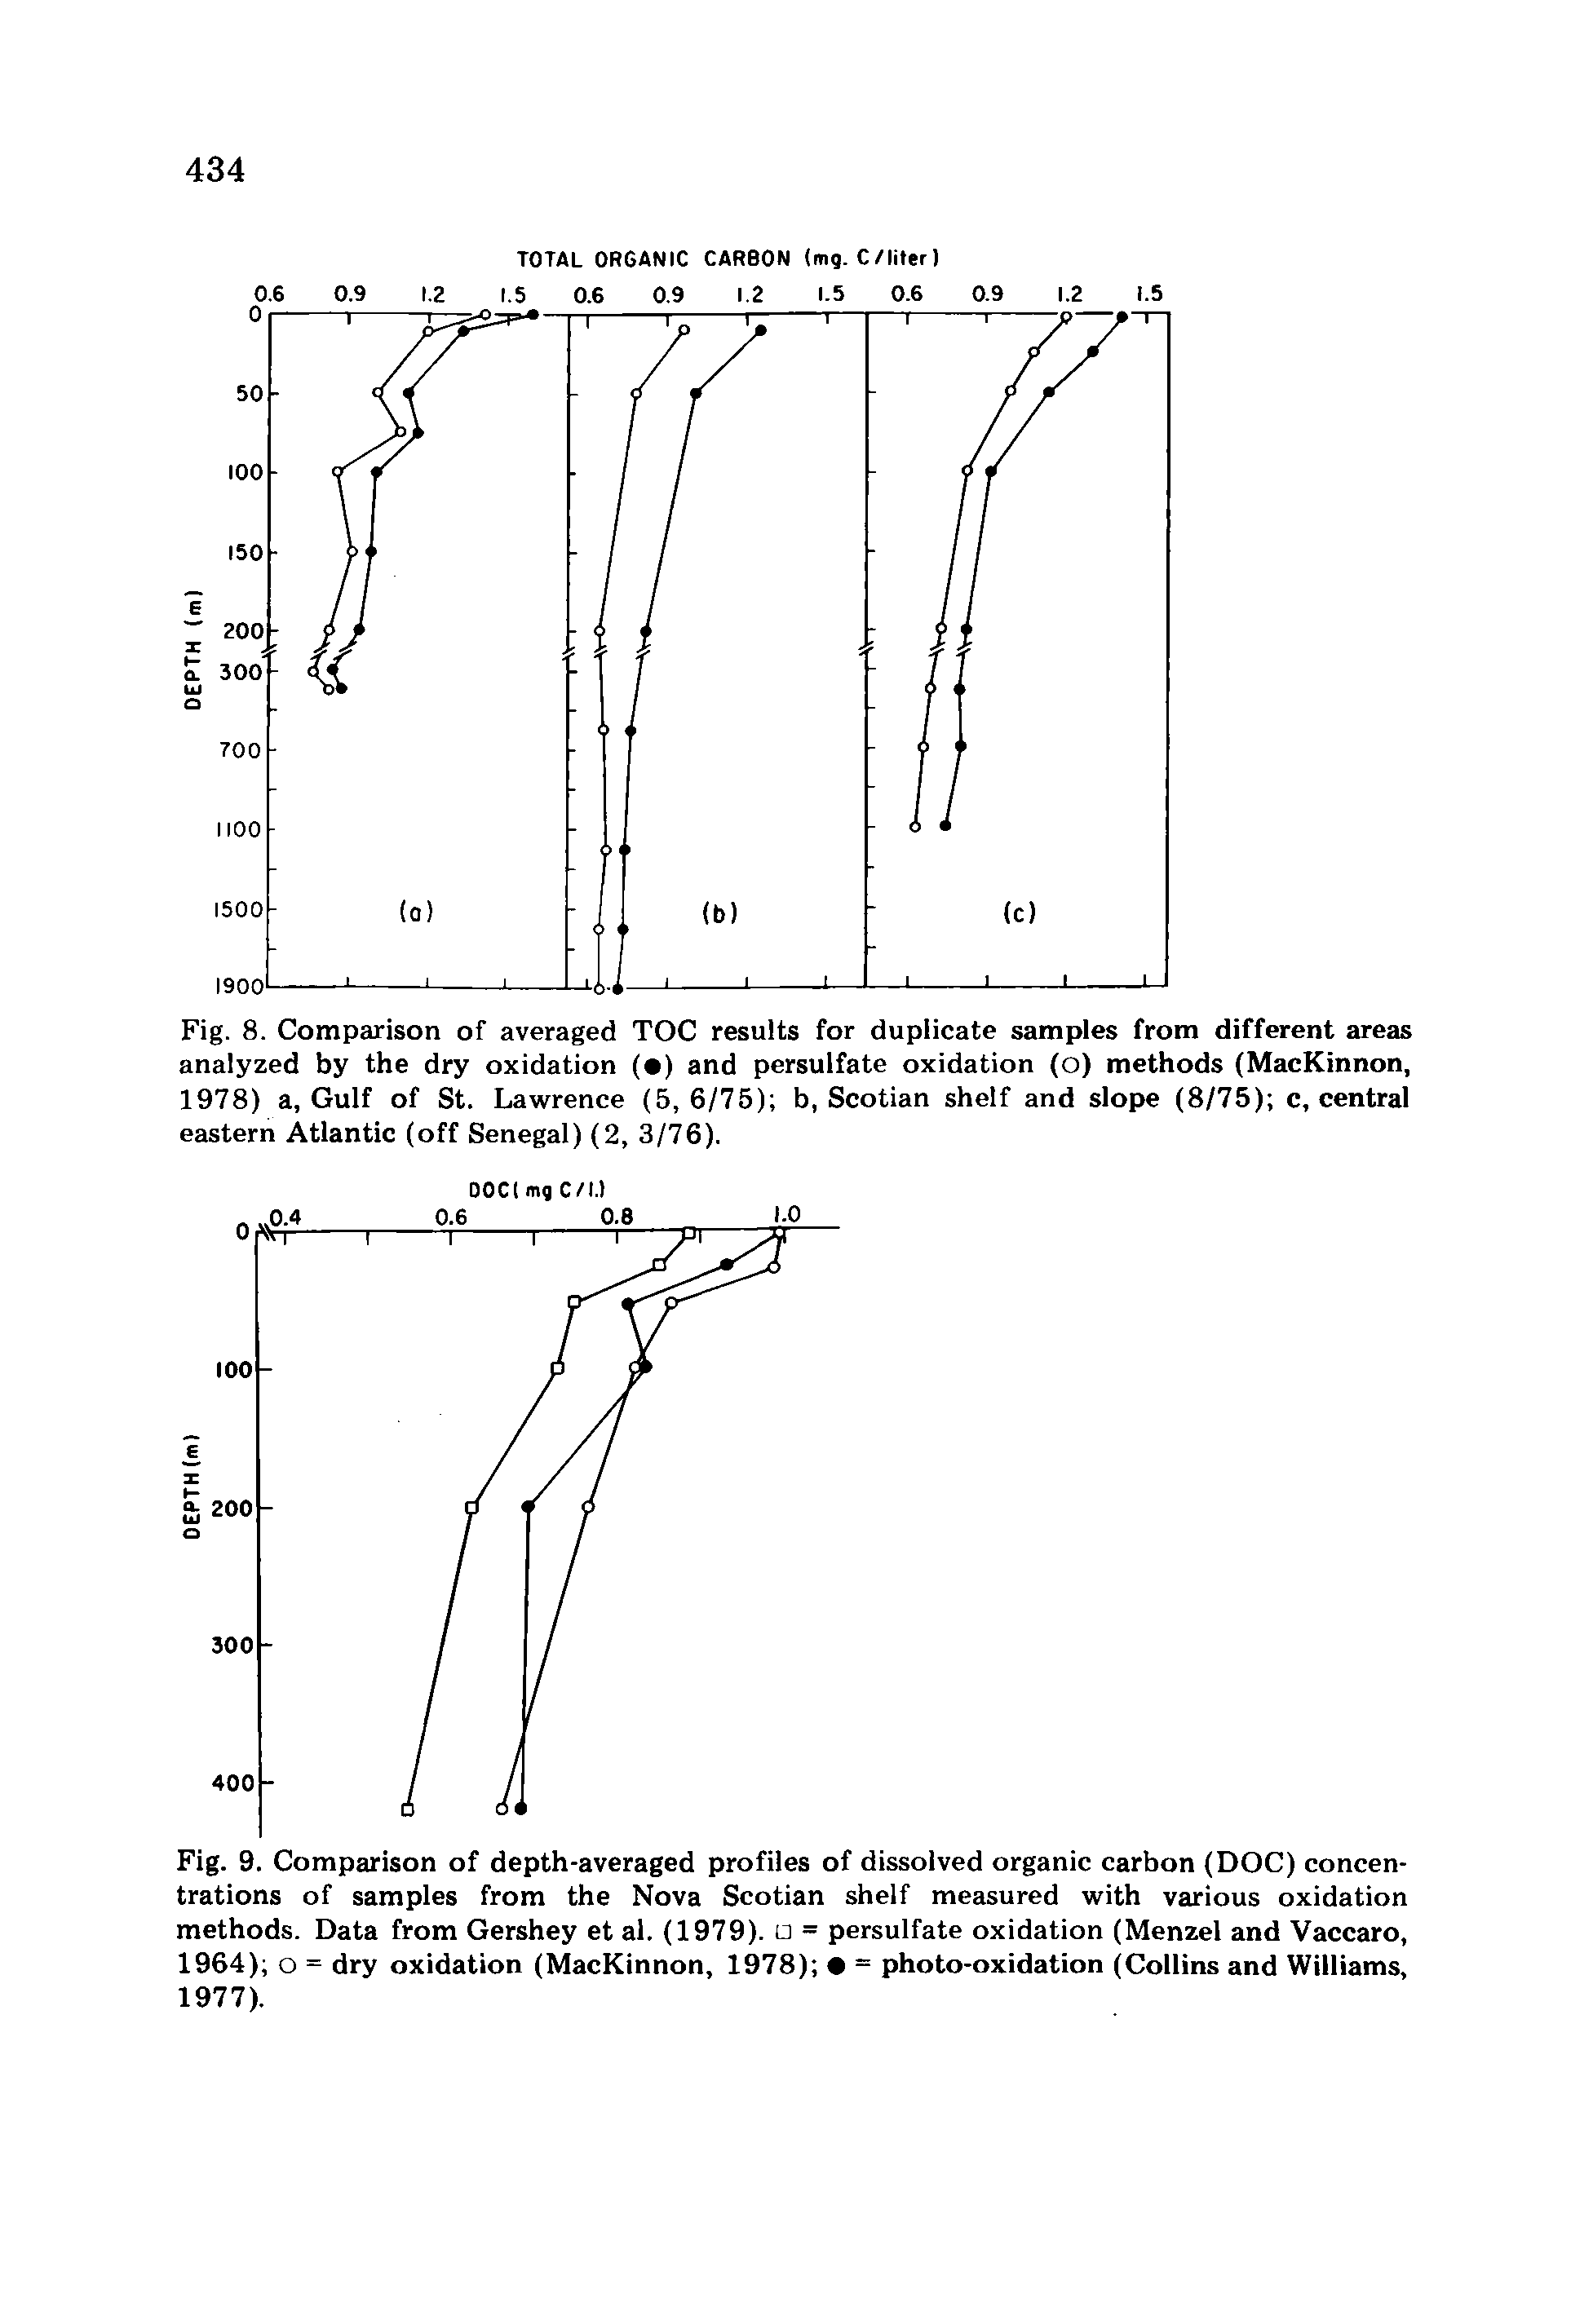 Fig. 9. Comparison of depth-averaged profiles of dissolved organic carbon (DOC) concentrations of samples from the Nova Scotian shelf measured with various oxidation methods. Data from Gershey et al. (1979). = persulfate oxidation (Menzel and Vaccaro, 1964) o = dry oxidation (MacKinnon, 1978) = photo-oxidation (Collins and Williams, 1977).